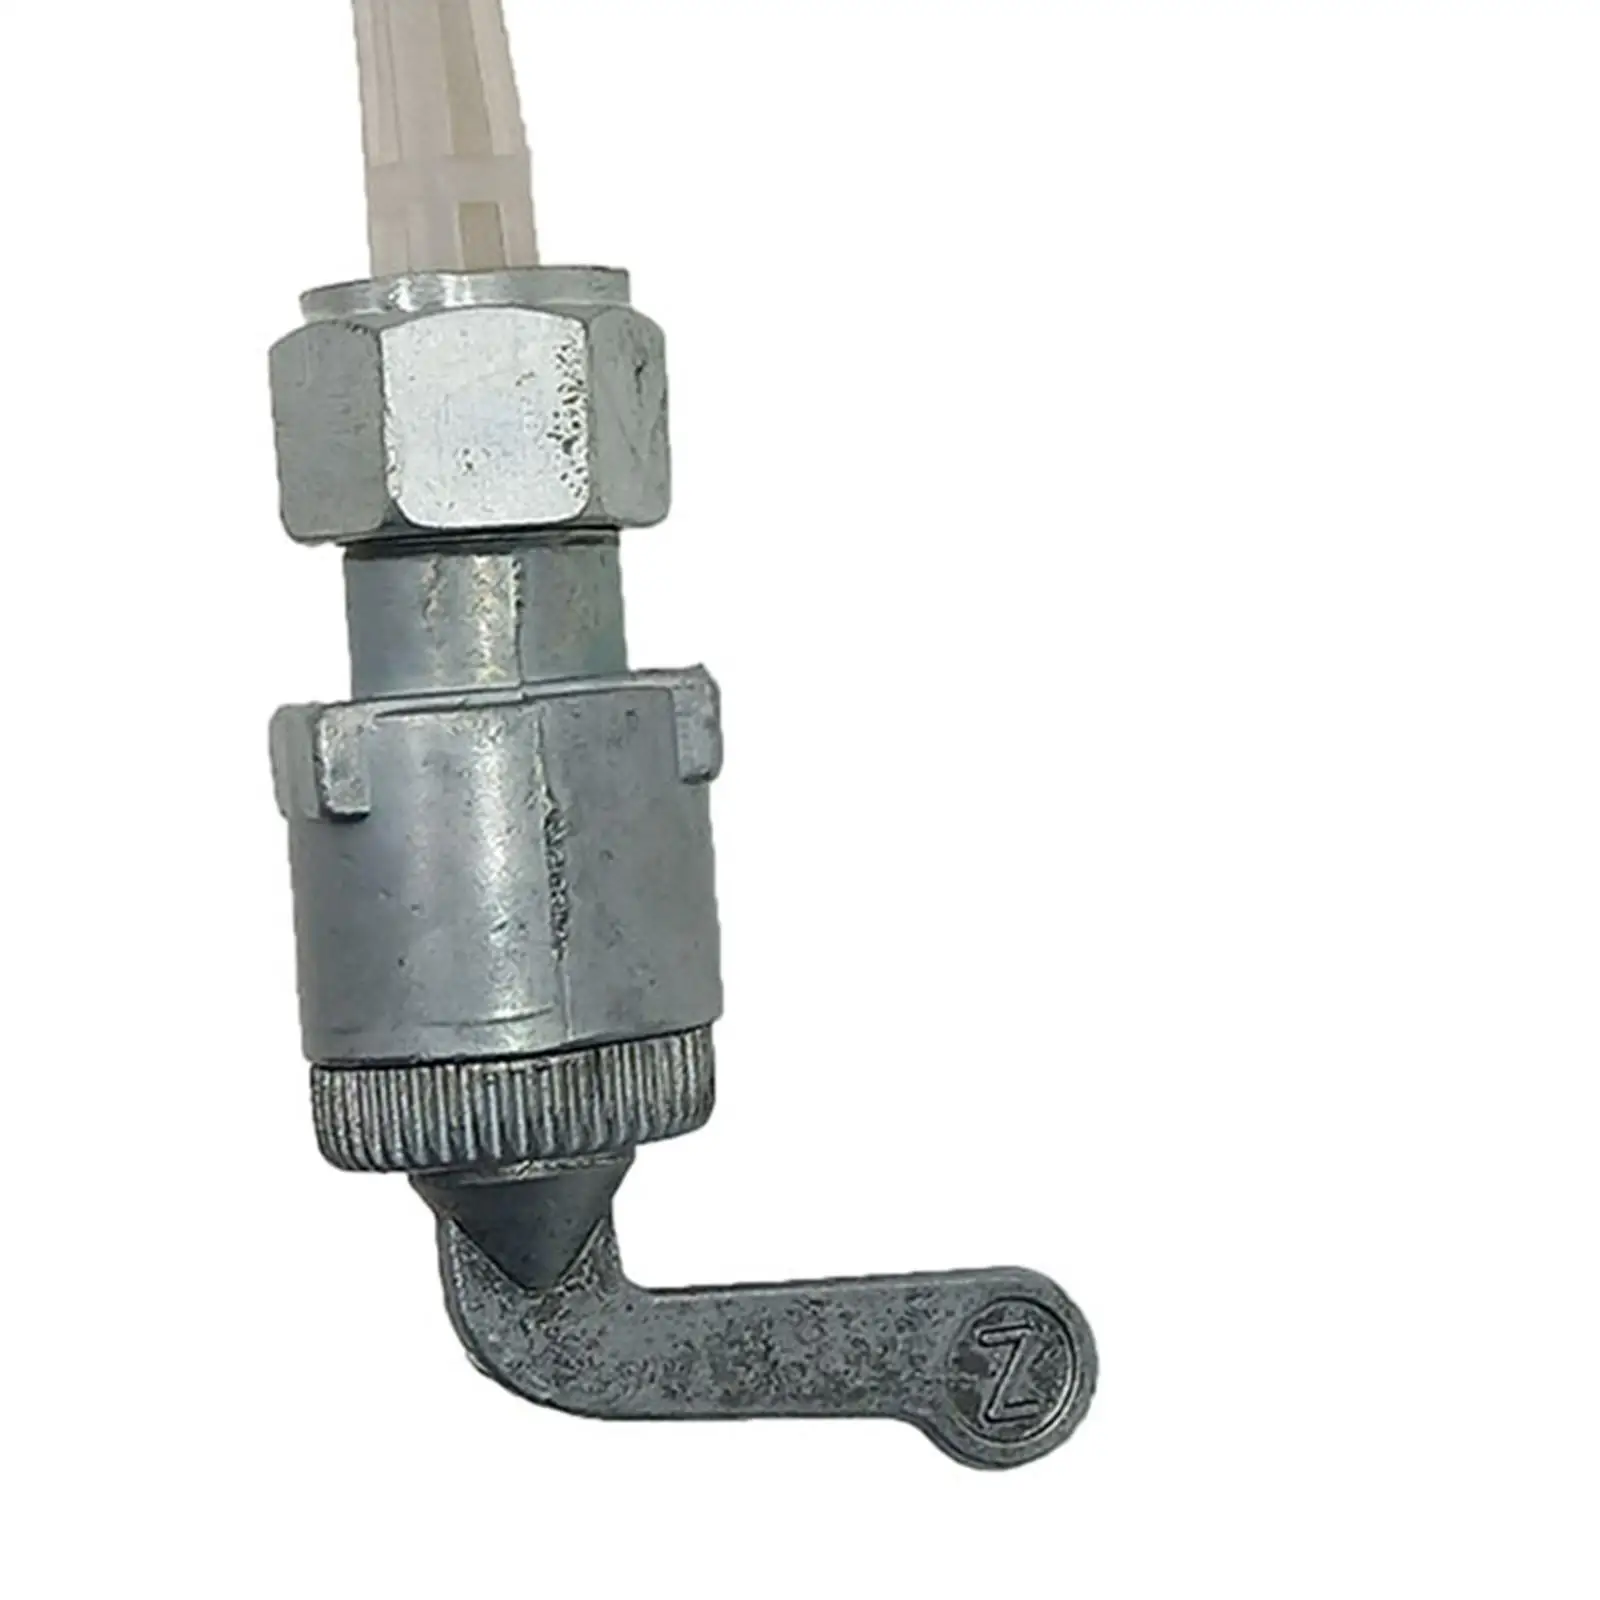 Fuel/Gas Tank Petcock Valve Replacement Easy to Use Premium Accessories 11mm